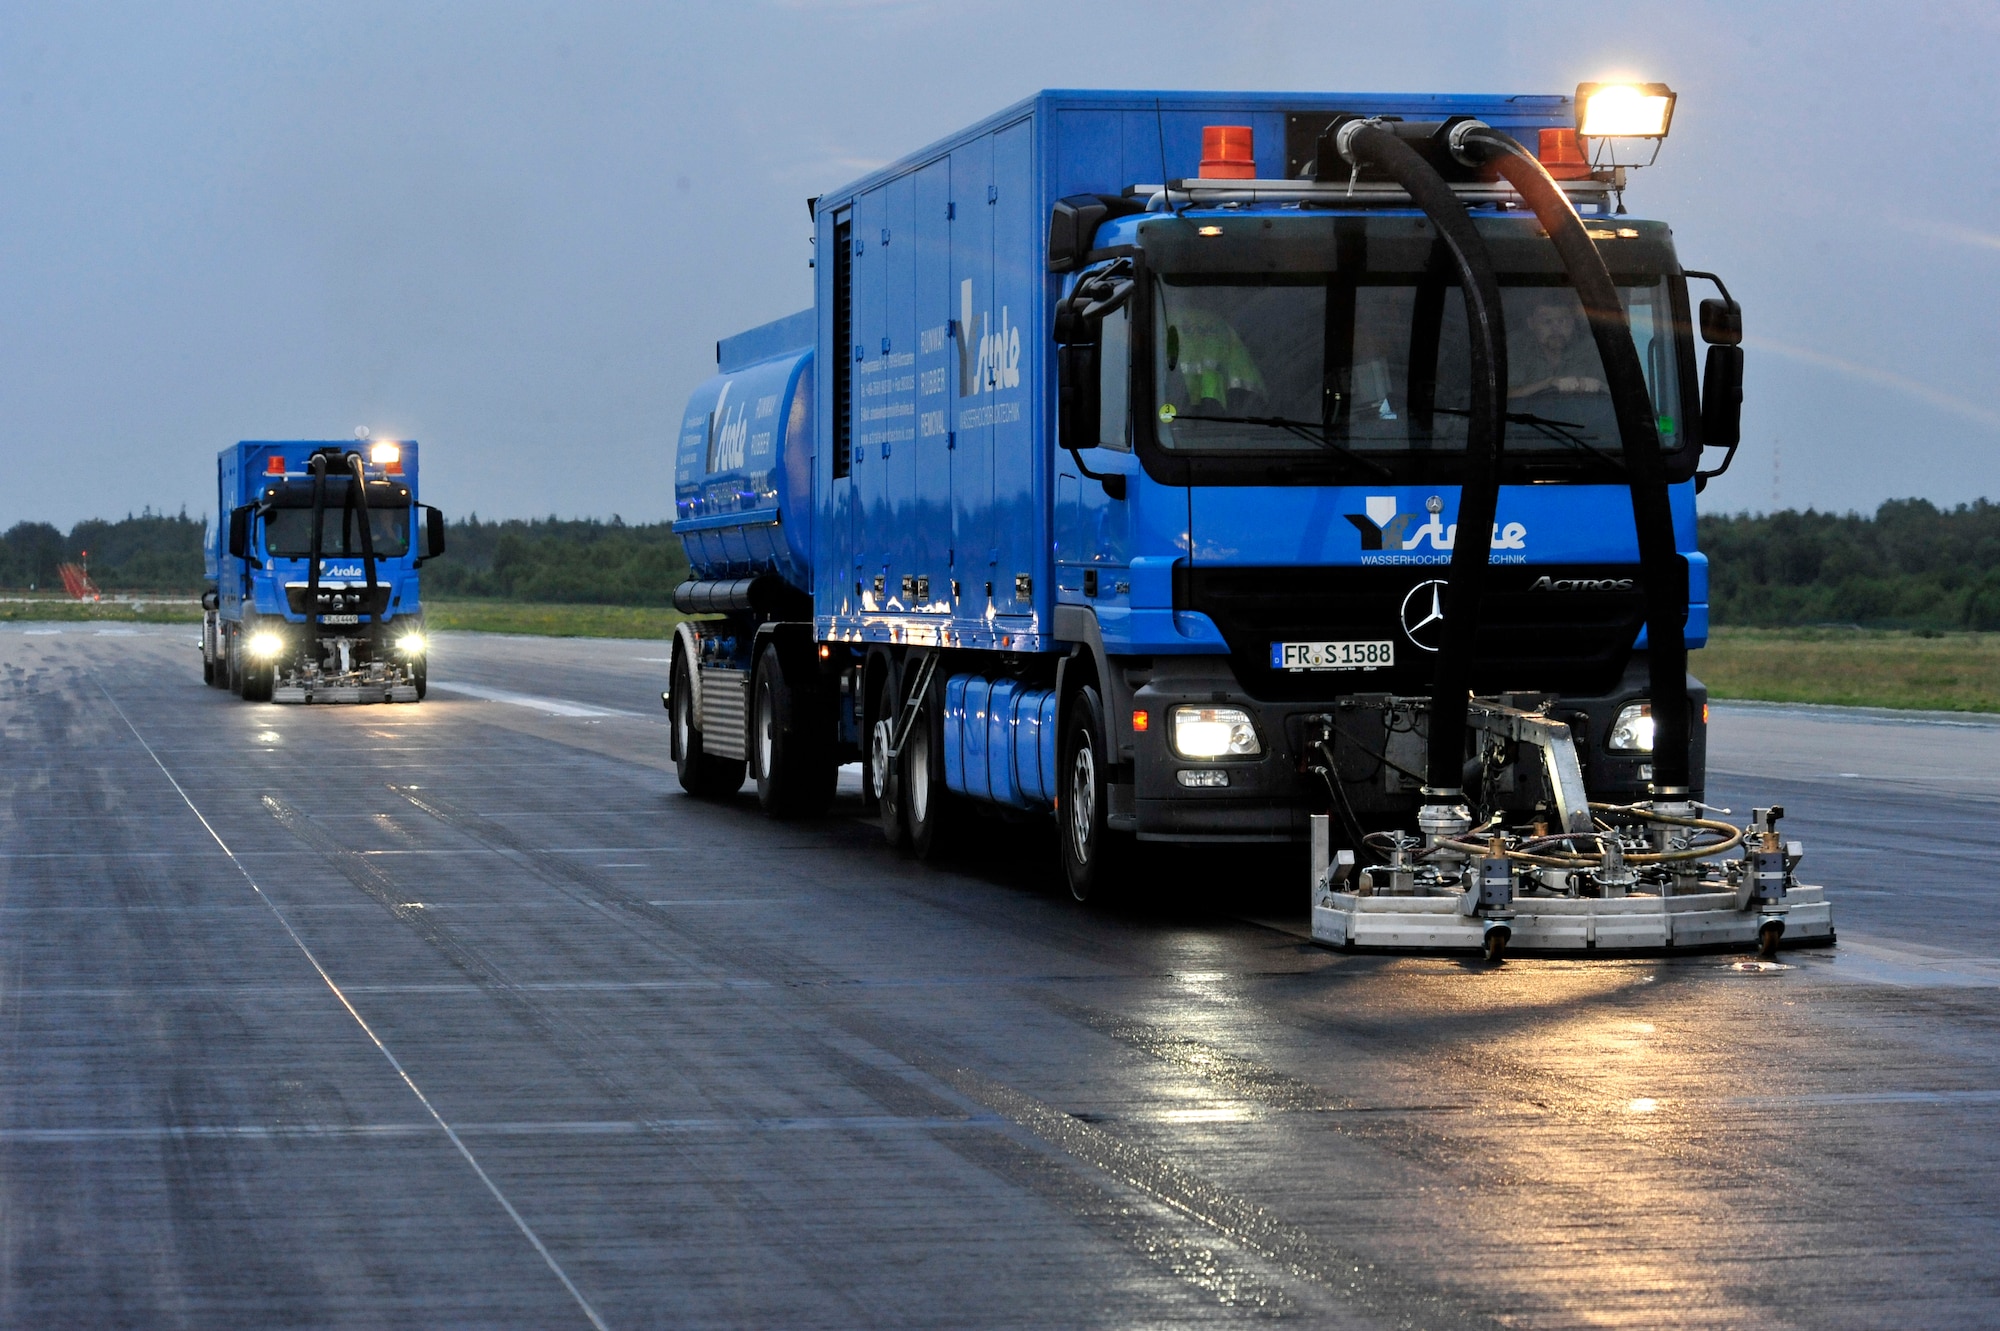 Contractors from Strate Wasserhochdrucktechnick e.K. remove excess rubber deposits from the runway to prevent aircraft from sliding off when they land, July 19, 2011, Ramstein Air Base, Germany.  The weeklong project cost $91K.  (U.S. Air Force Photo by Tech. Sgt. Chenzira Mallory)